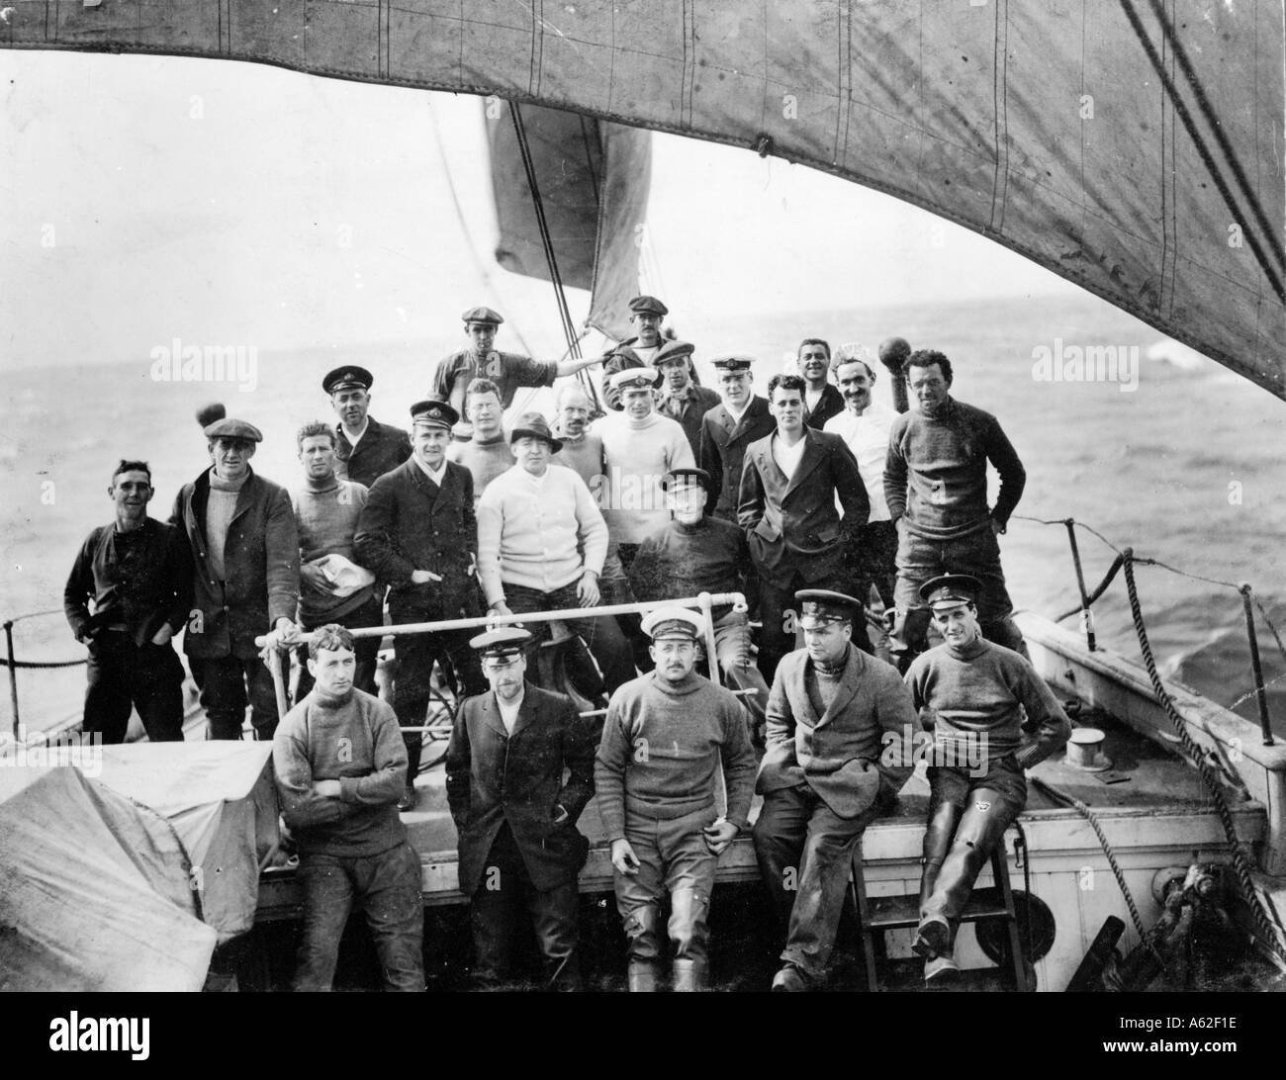 the-crew-of-the-endurance-taken-on-the-bow-imperial-trans-antarctic-A62F1E.thumb.jpg.dfe5324b7eb4f2ff8dfd5a11e0d632a9.jpg.14d8df27c10ead2d44d6c4c012efd8bb.jpg